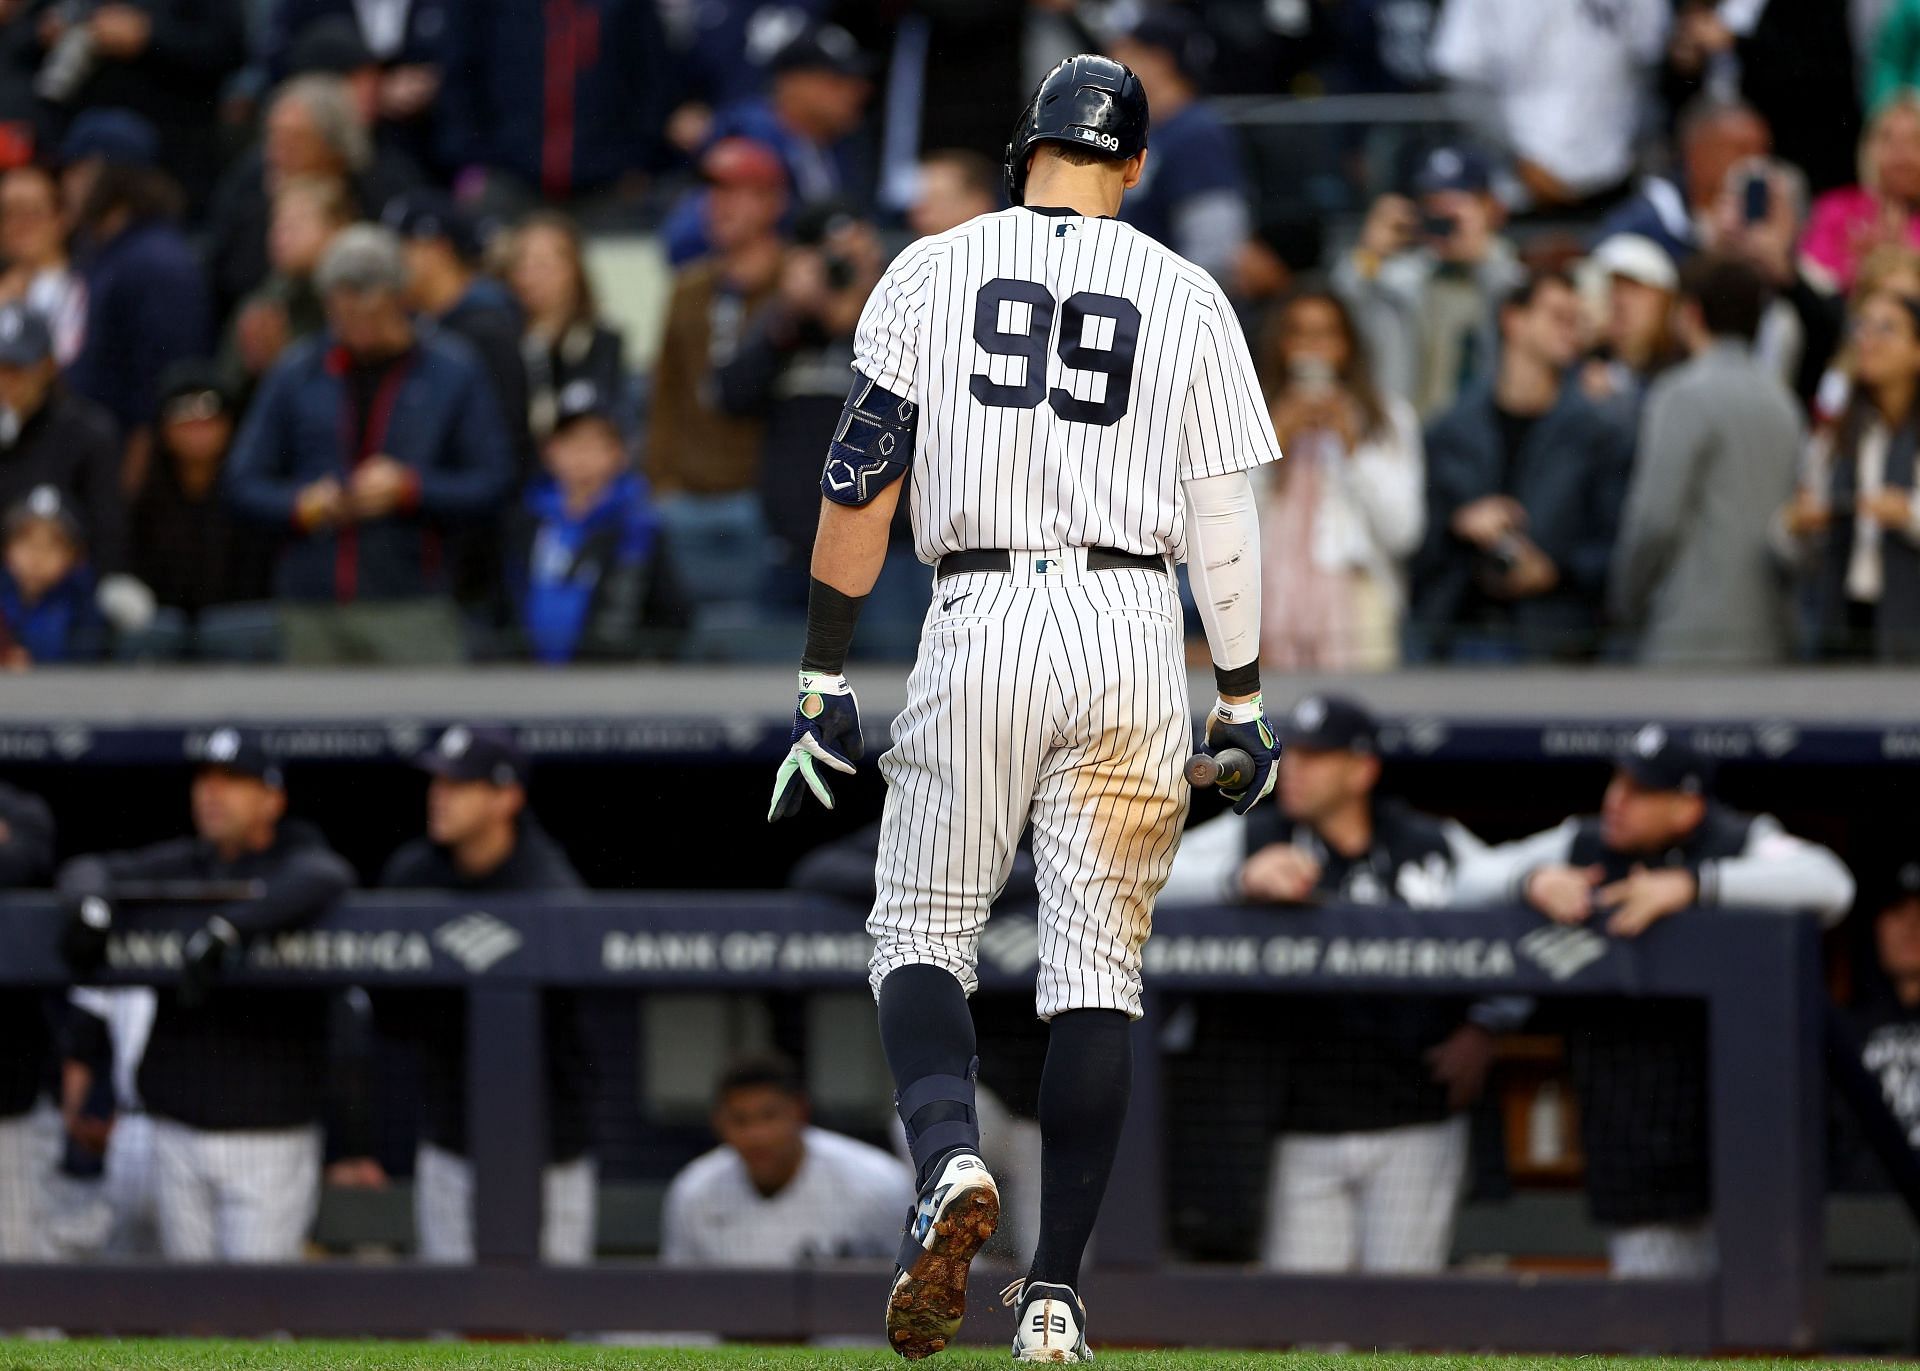 Aaron Judge #99 of the New York Yankees heads to the dugout after striking out